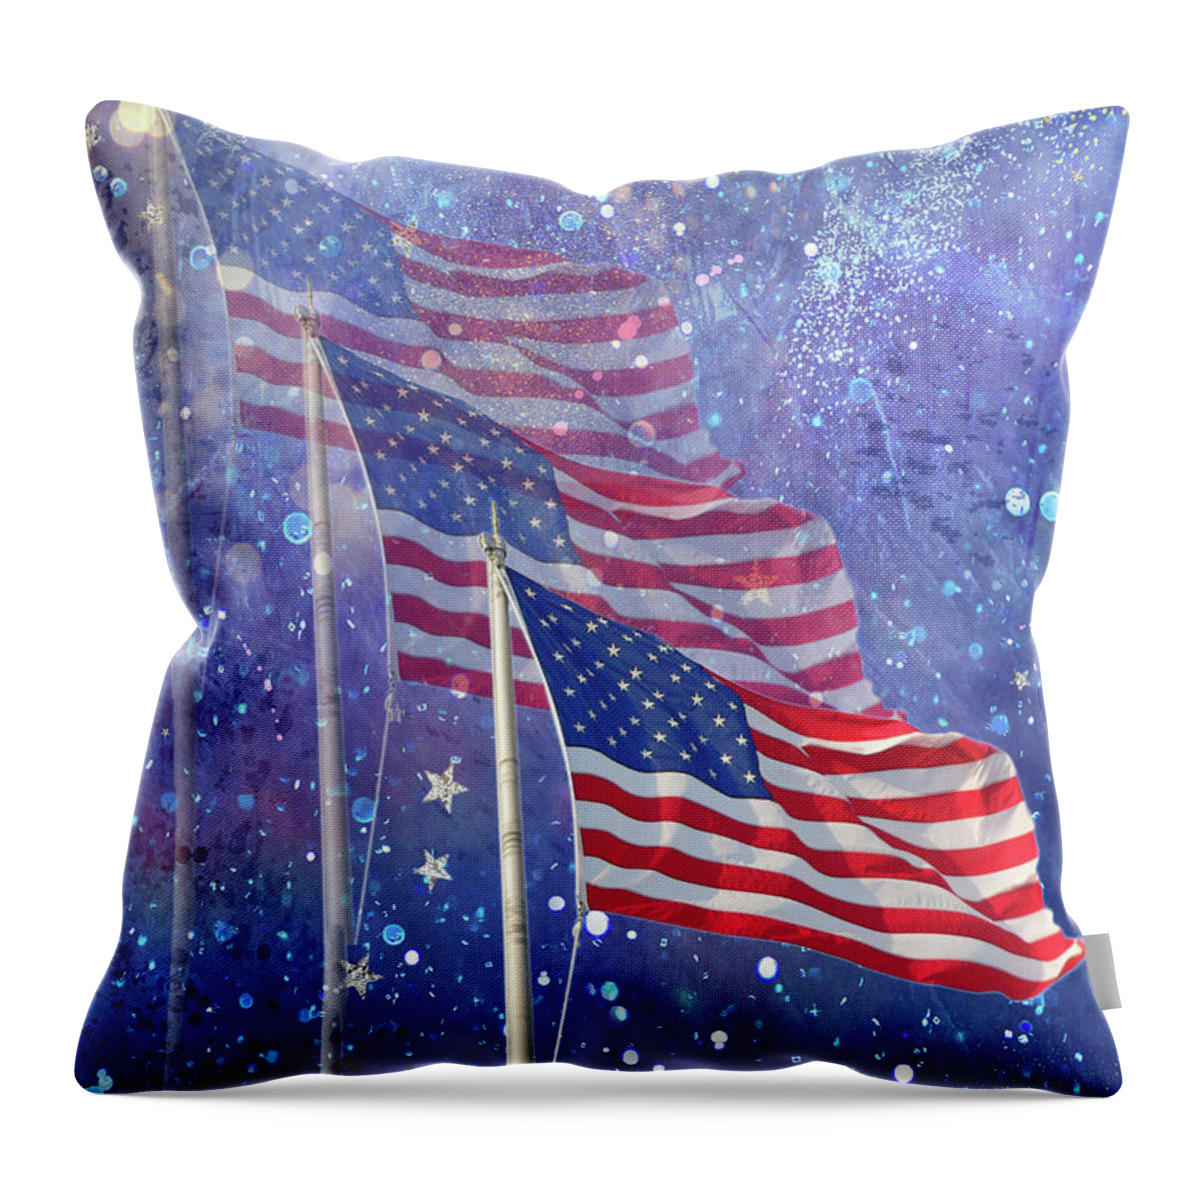 Flag Throw Pillow featuring the mixed media Three Flags by Rosalie Scanlon